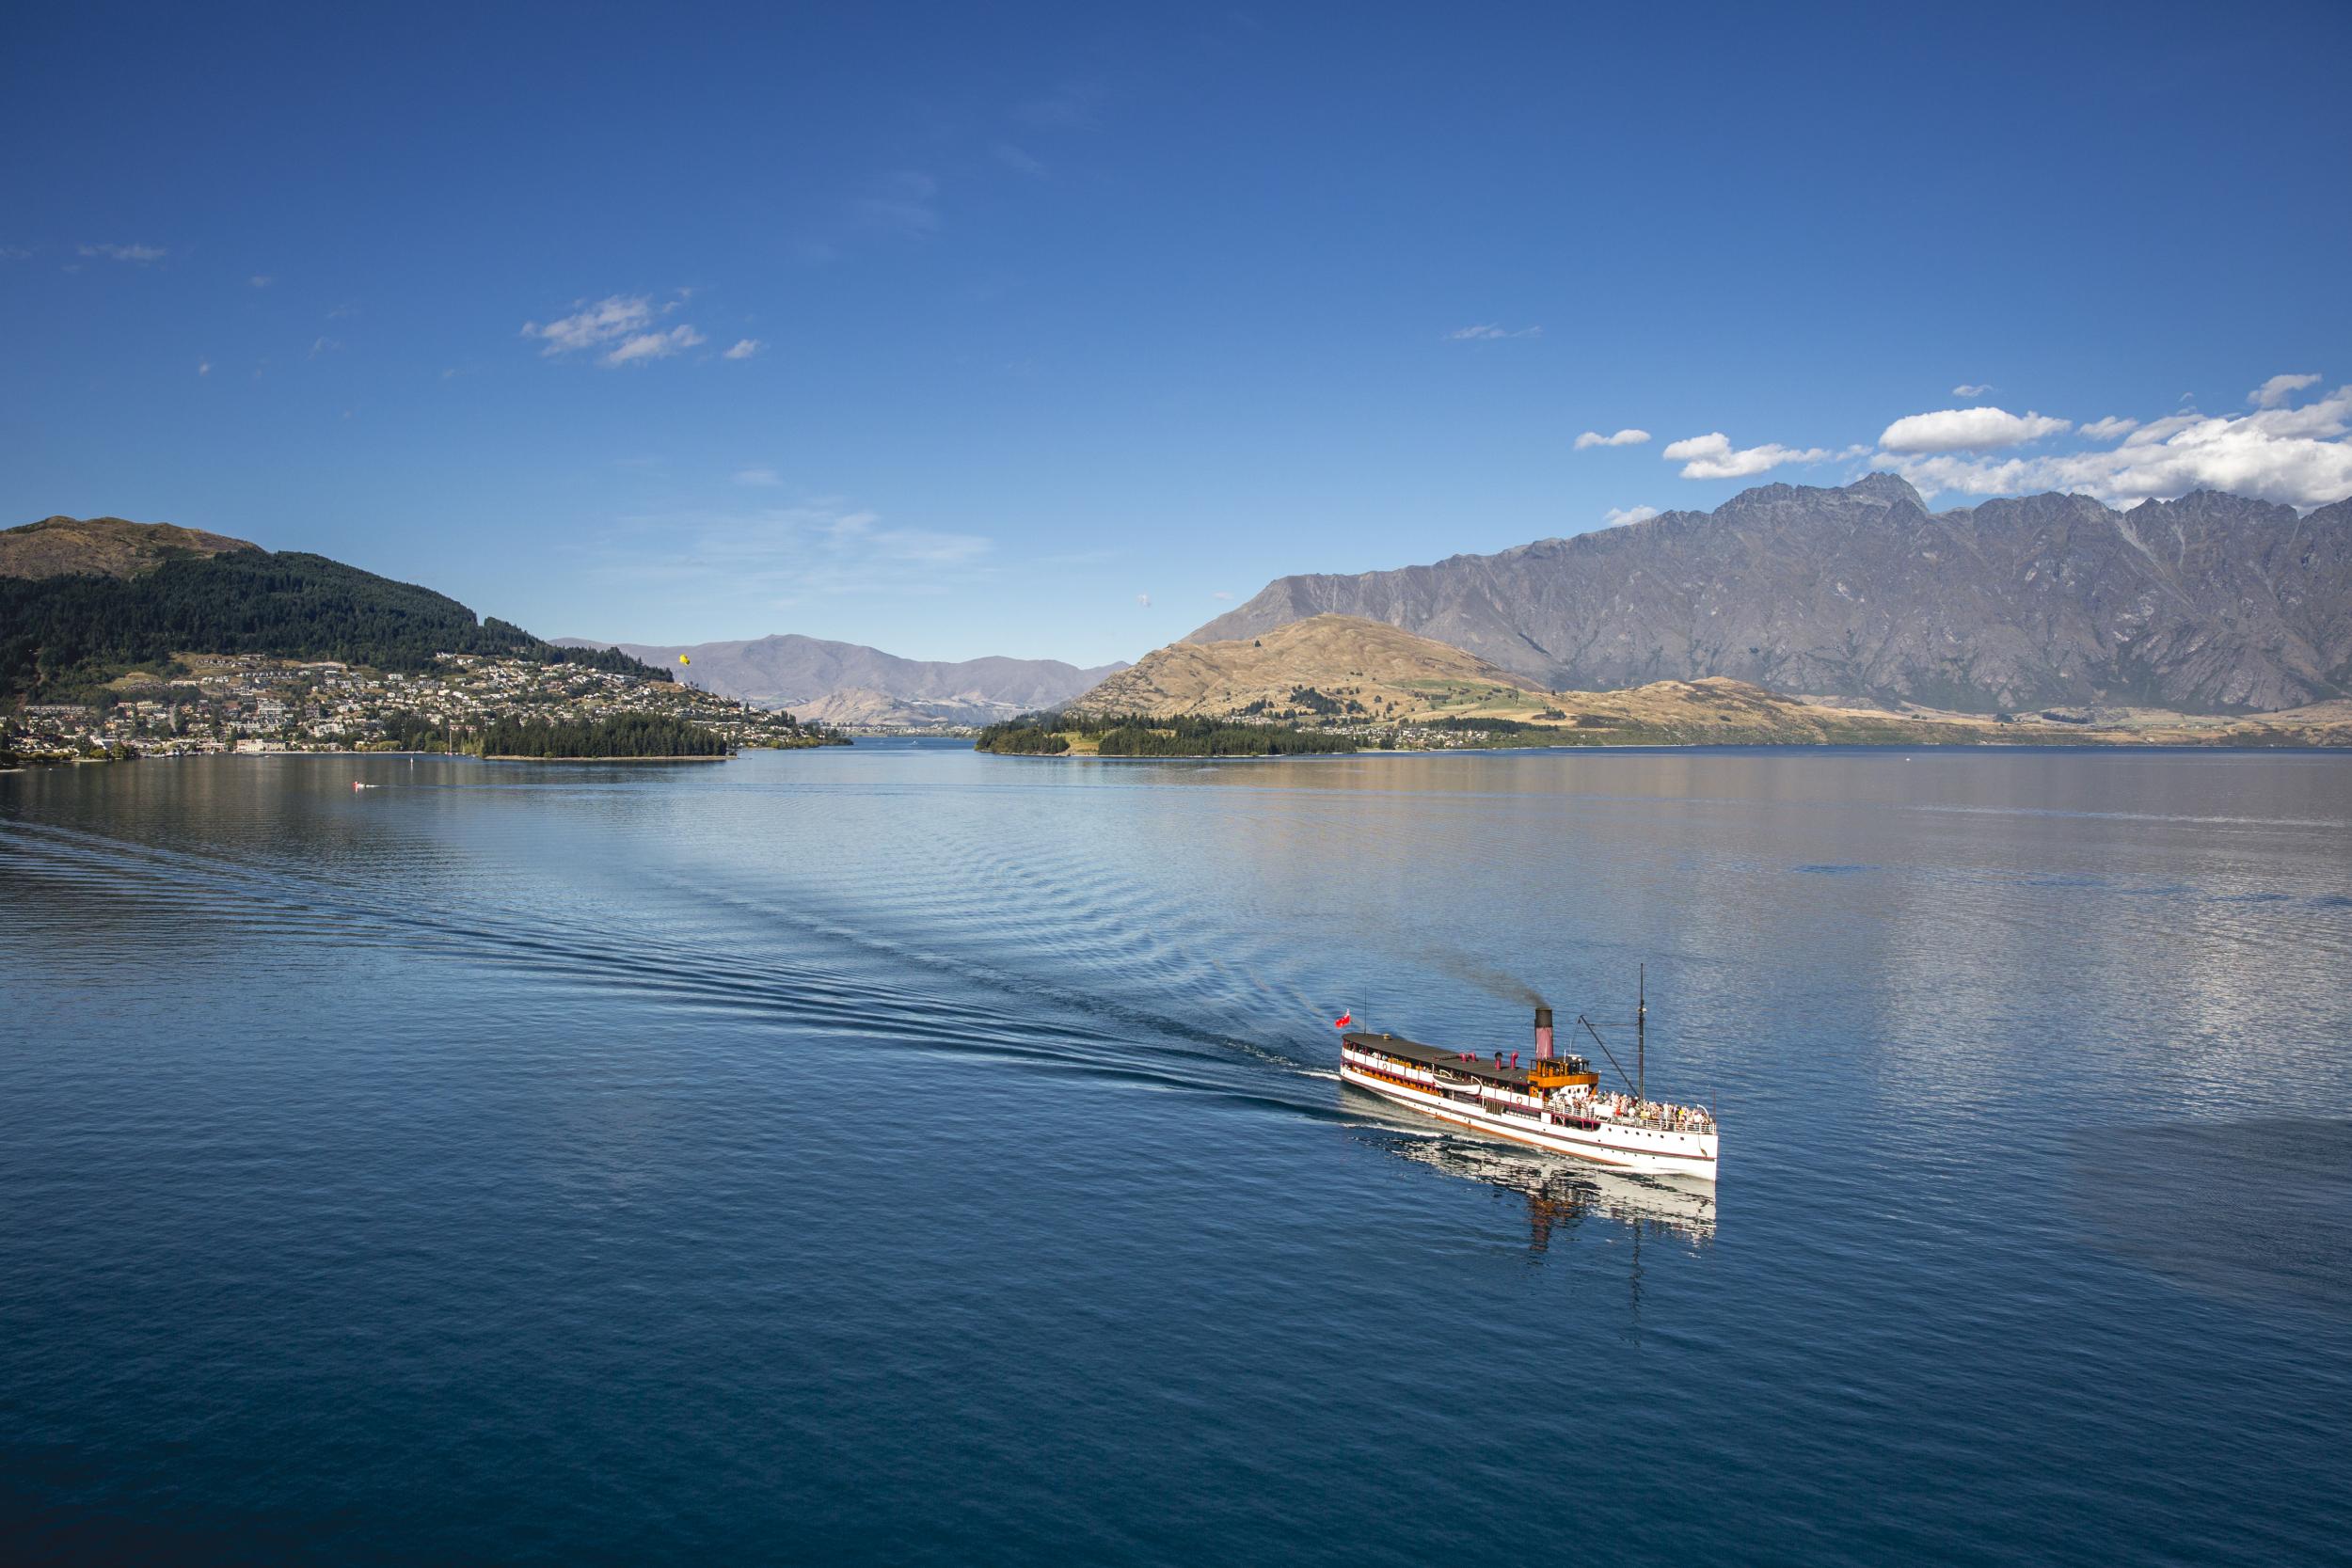 Earnslaw is the oldest coal-fired steamer in the southern hemisphere